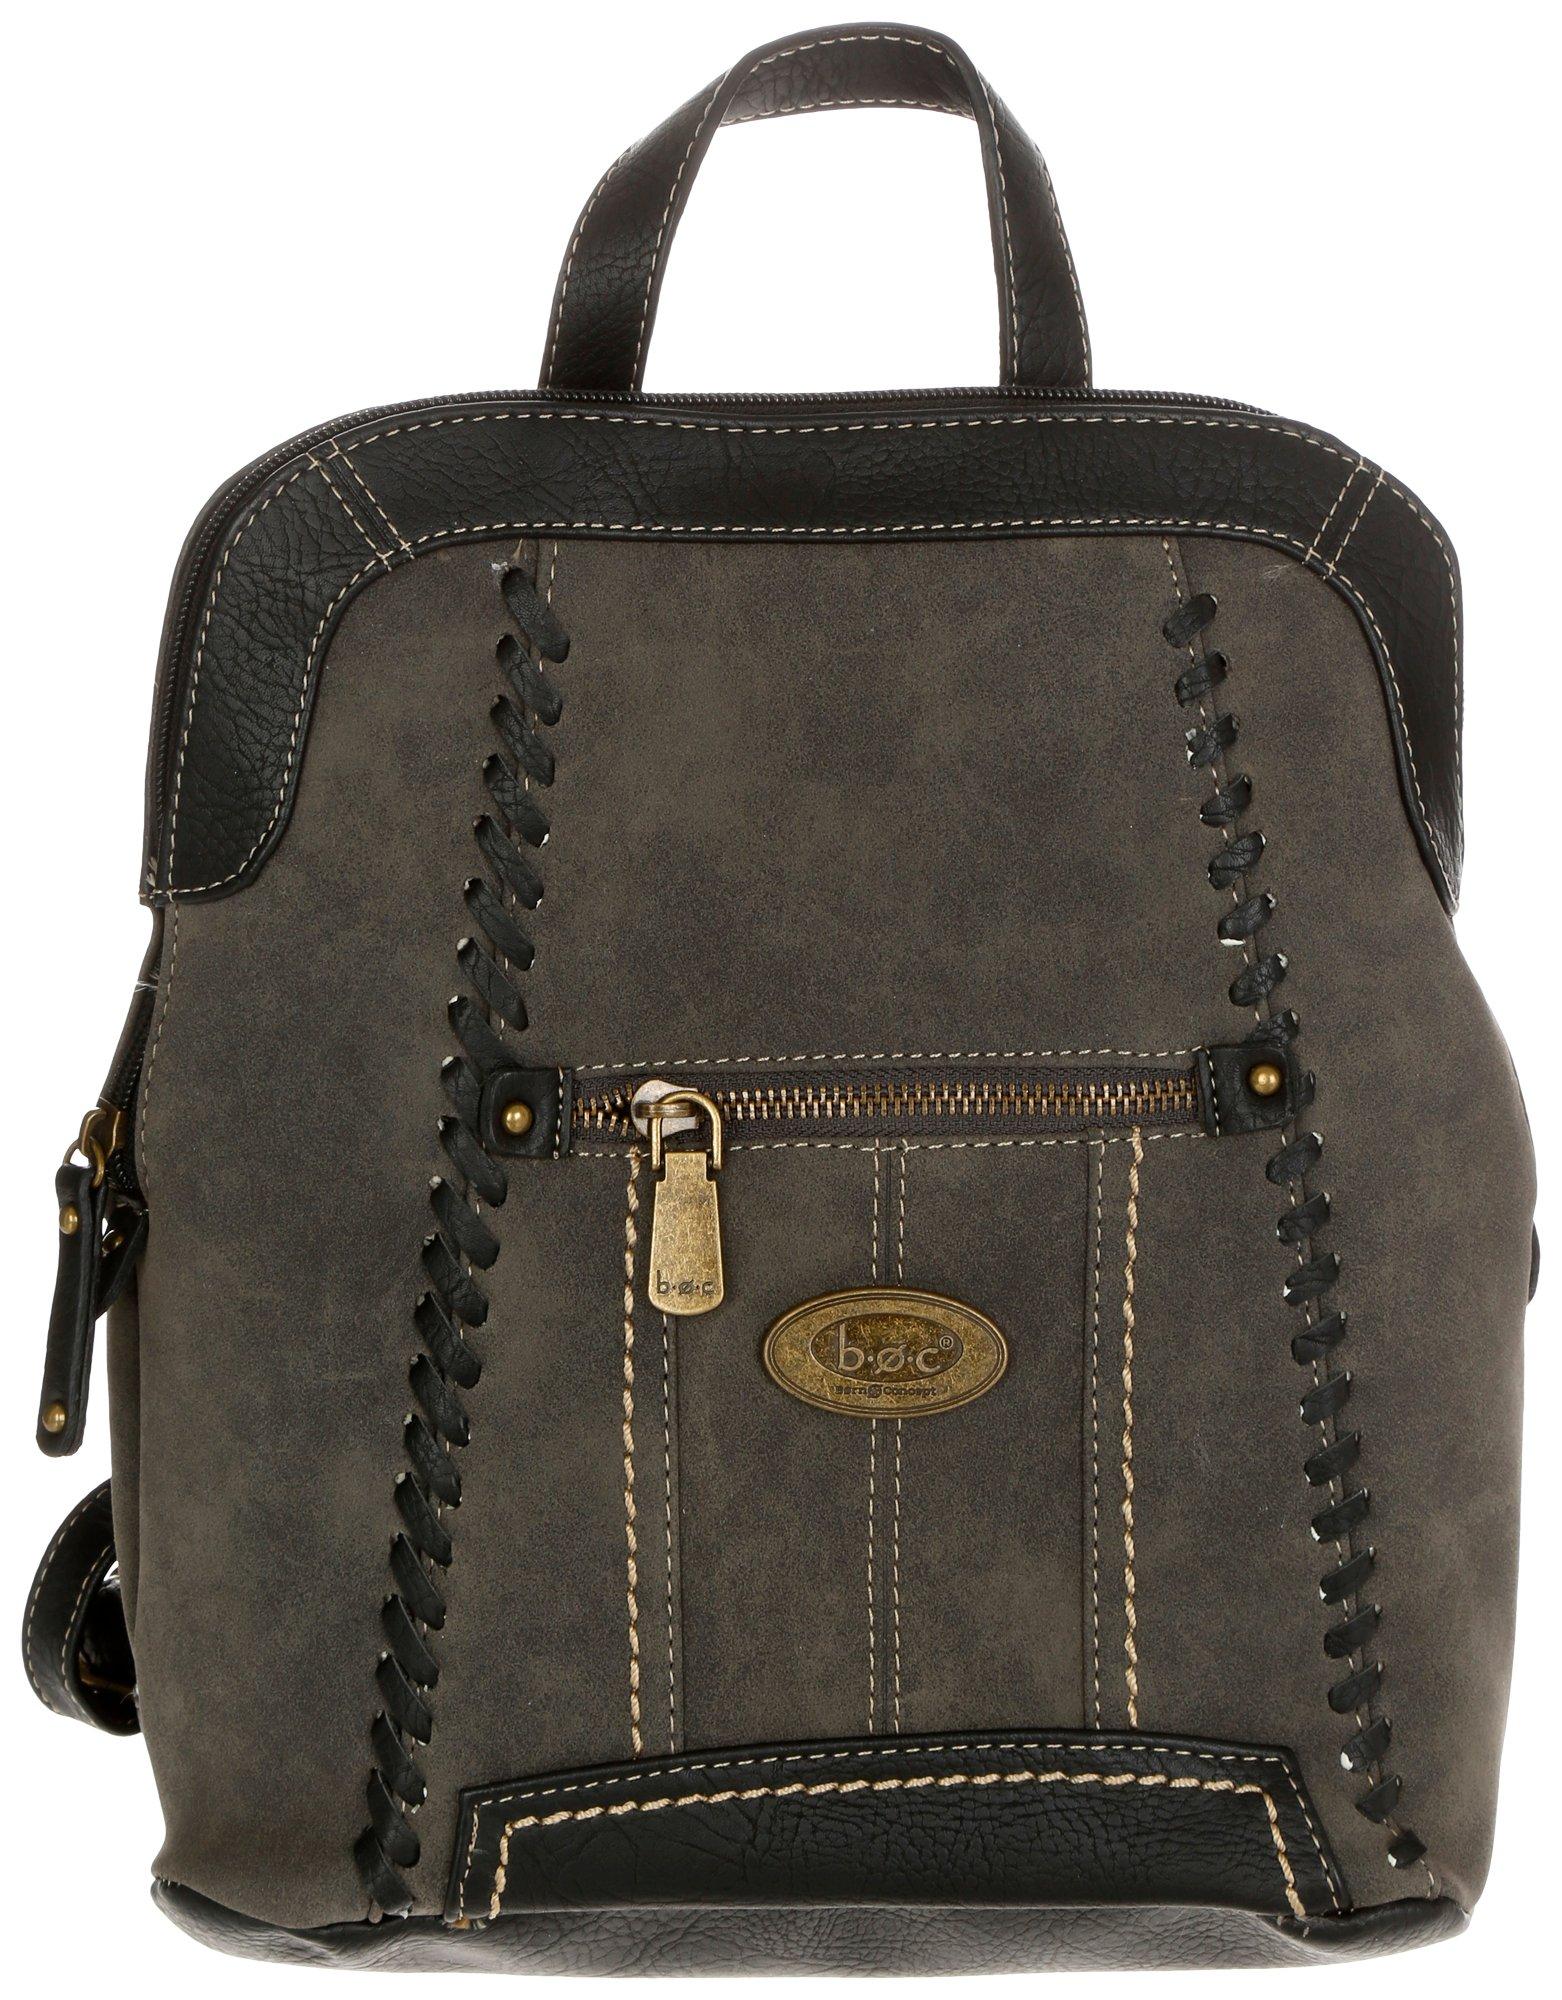 Faux Suede Backpack